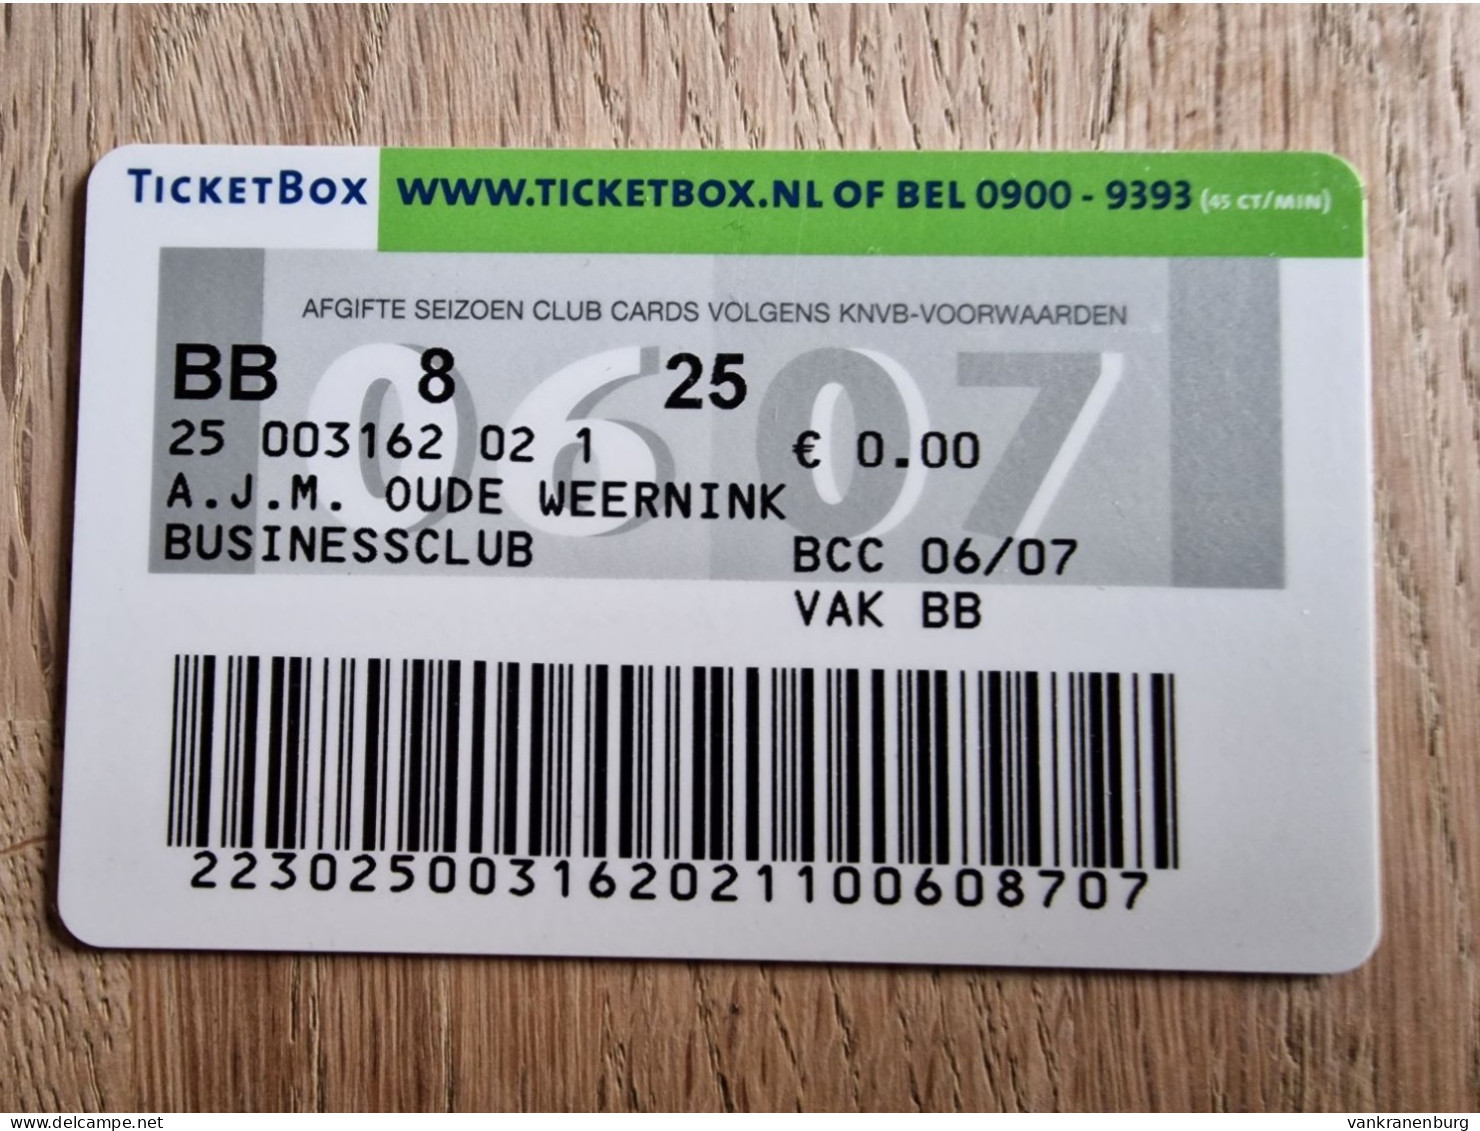 Business Club Card - SC Heracles Almelo - 2006-2007 - Football Soccer Fussball Voetbal Foot - Habillement, Souvenirs & Autres